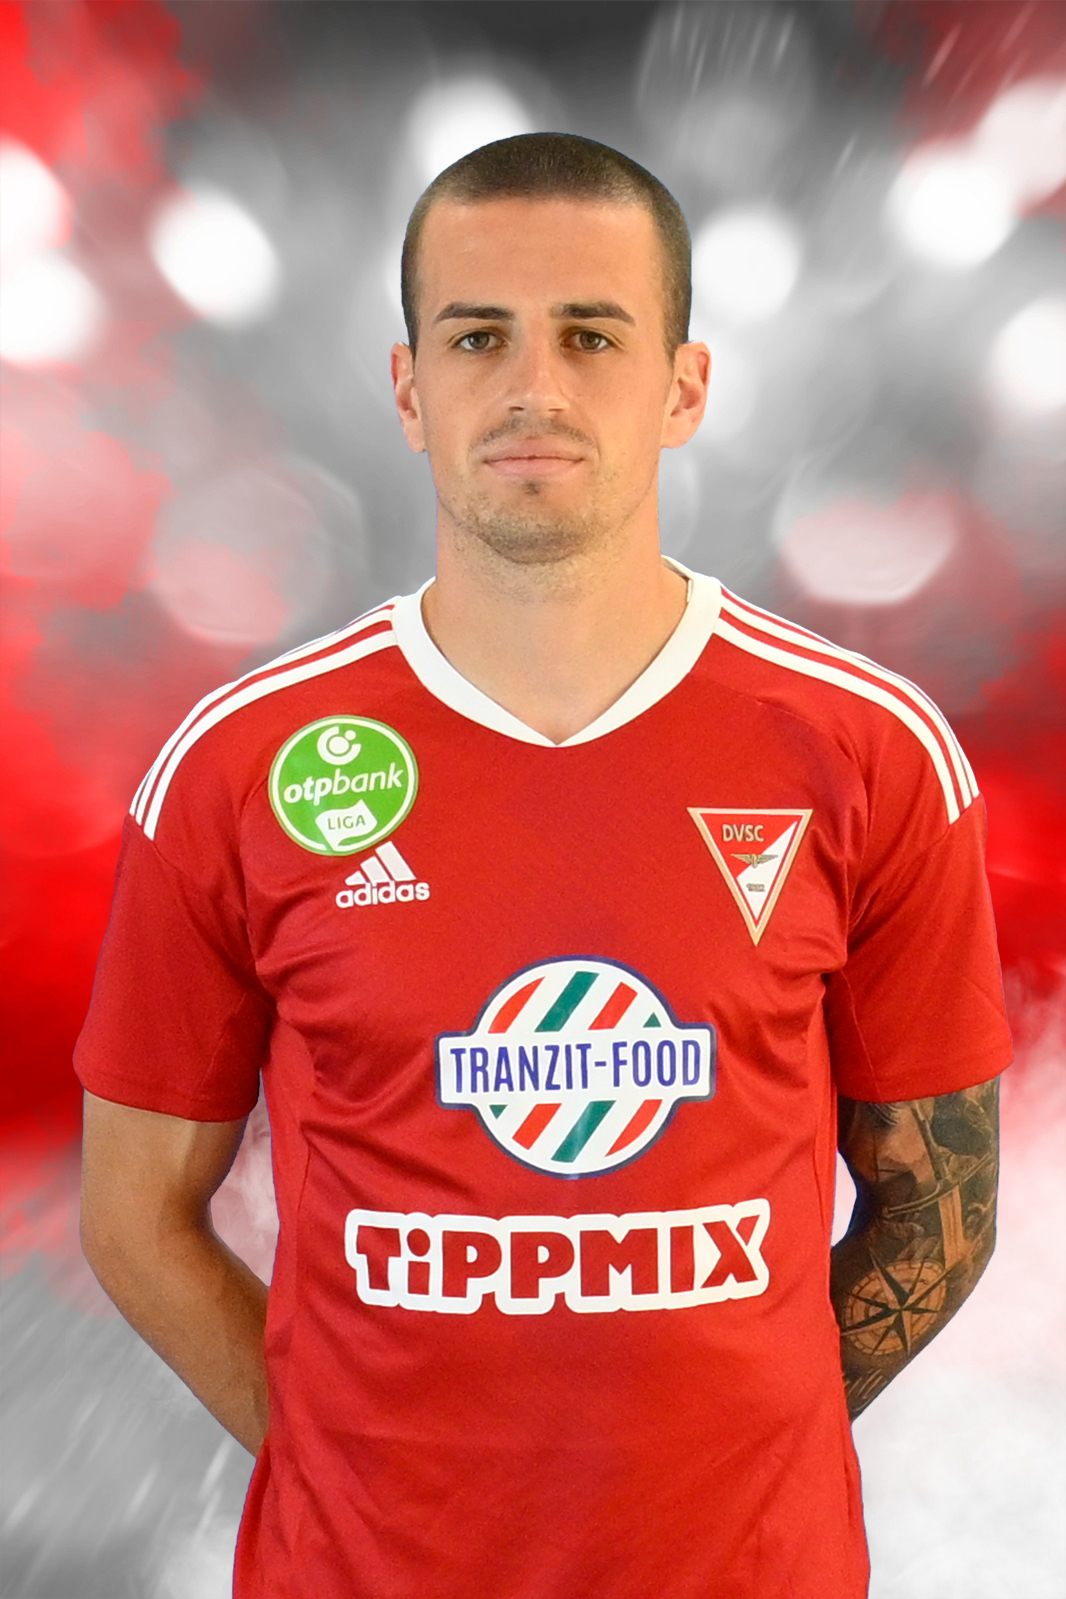 Stefan Loncar in the squad of the Montenegrin national team - DVSC